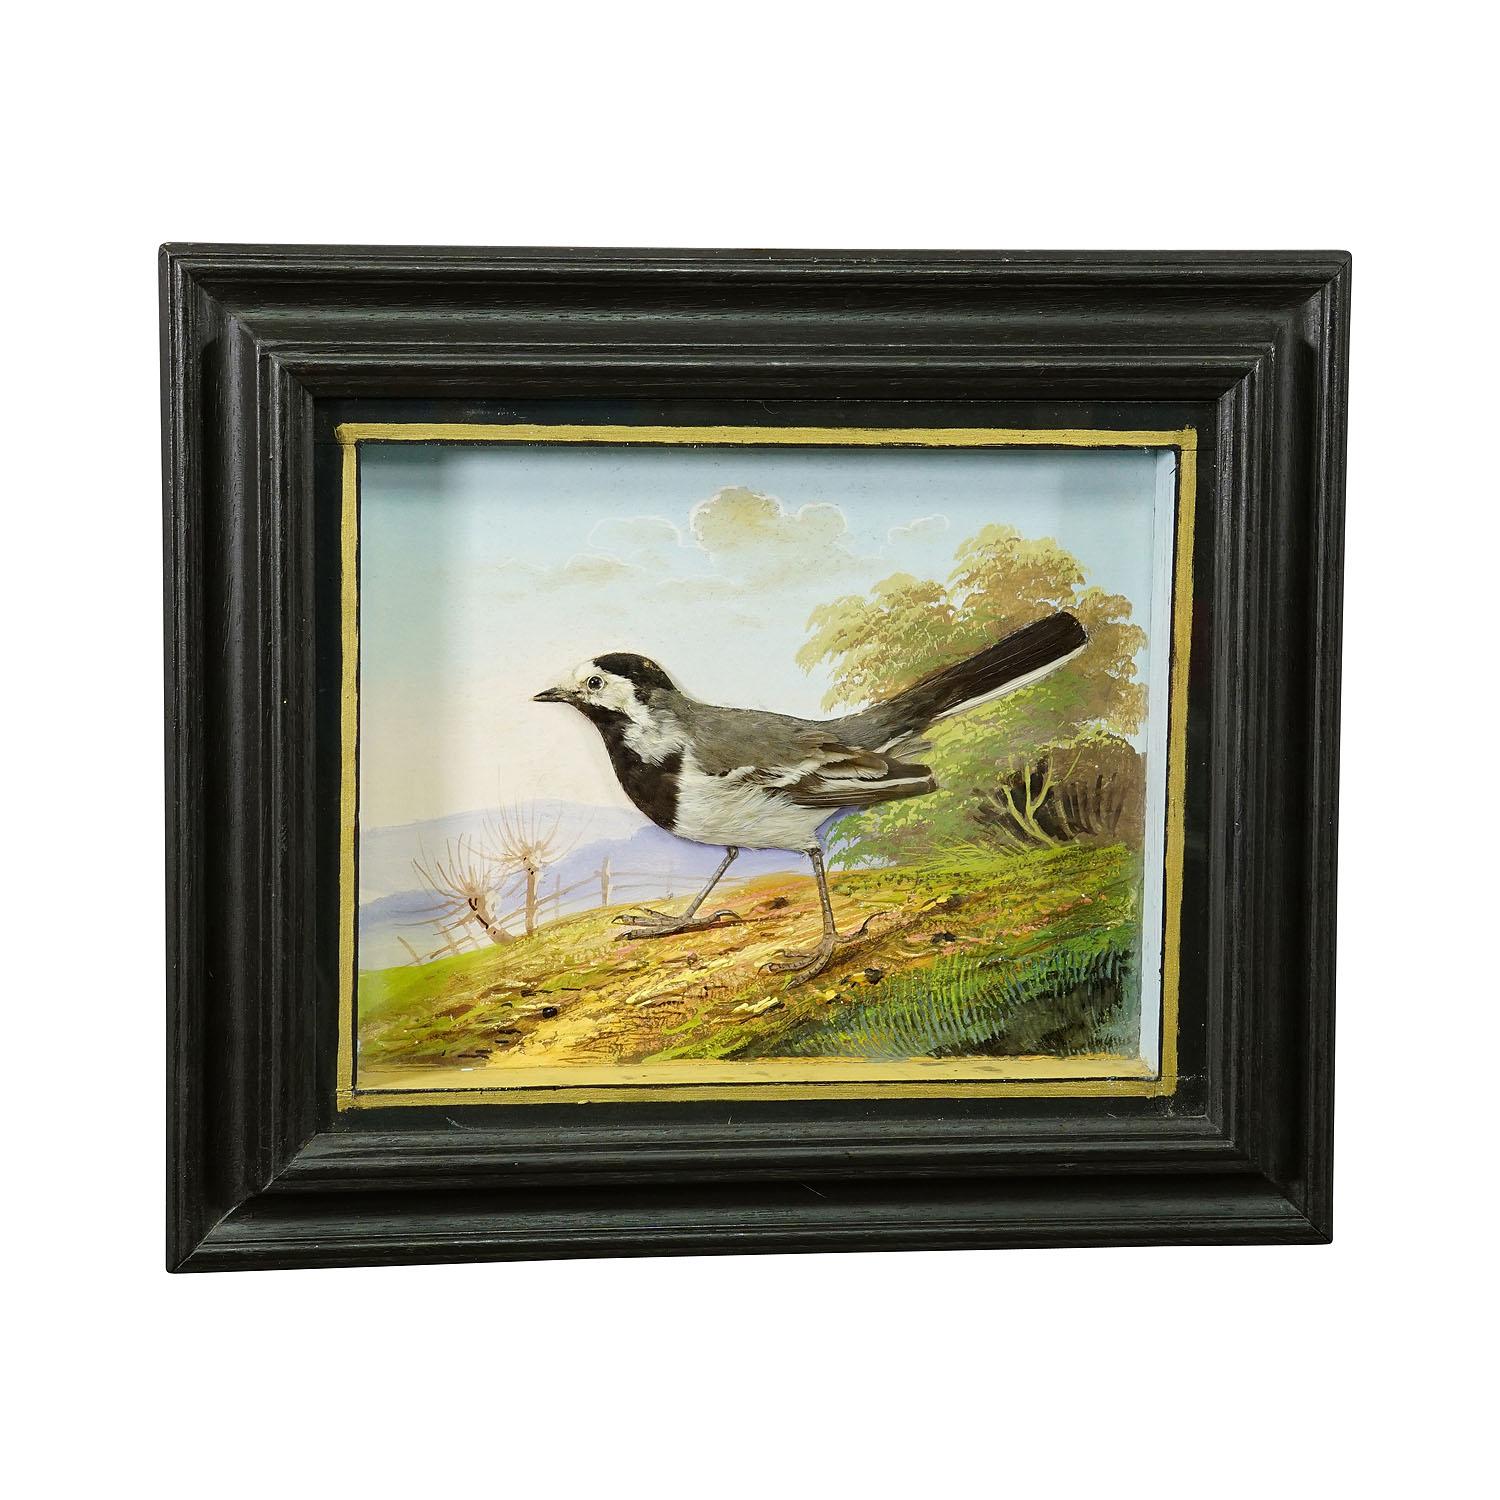 Victorian Taxidermy Diorama with white wagtail ca. 1900

An antique diorama with a taxidermied white wagtail sitting in a handpainted landscape. Mounted in a wooden case with ebonized frame and glass coverage. On the back with handwritten paper